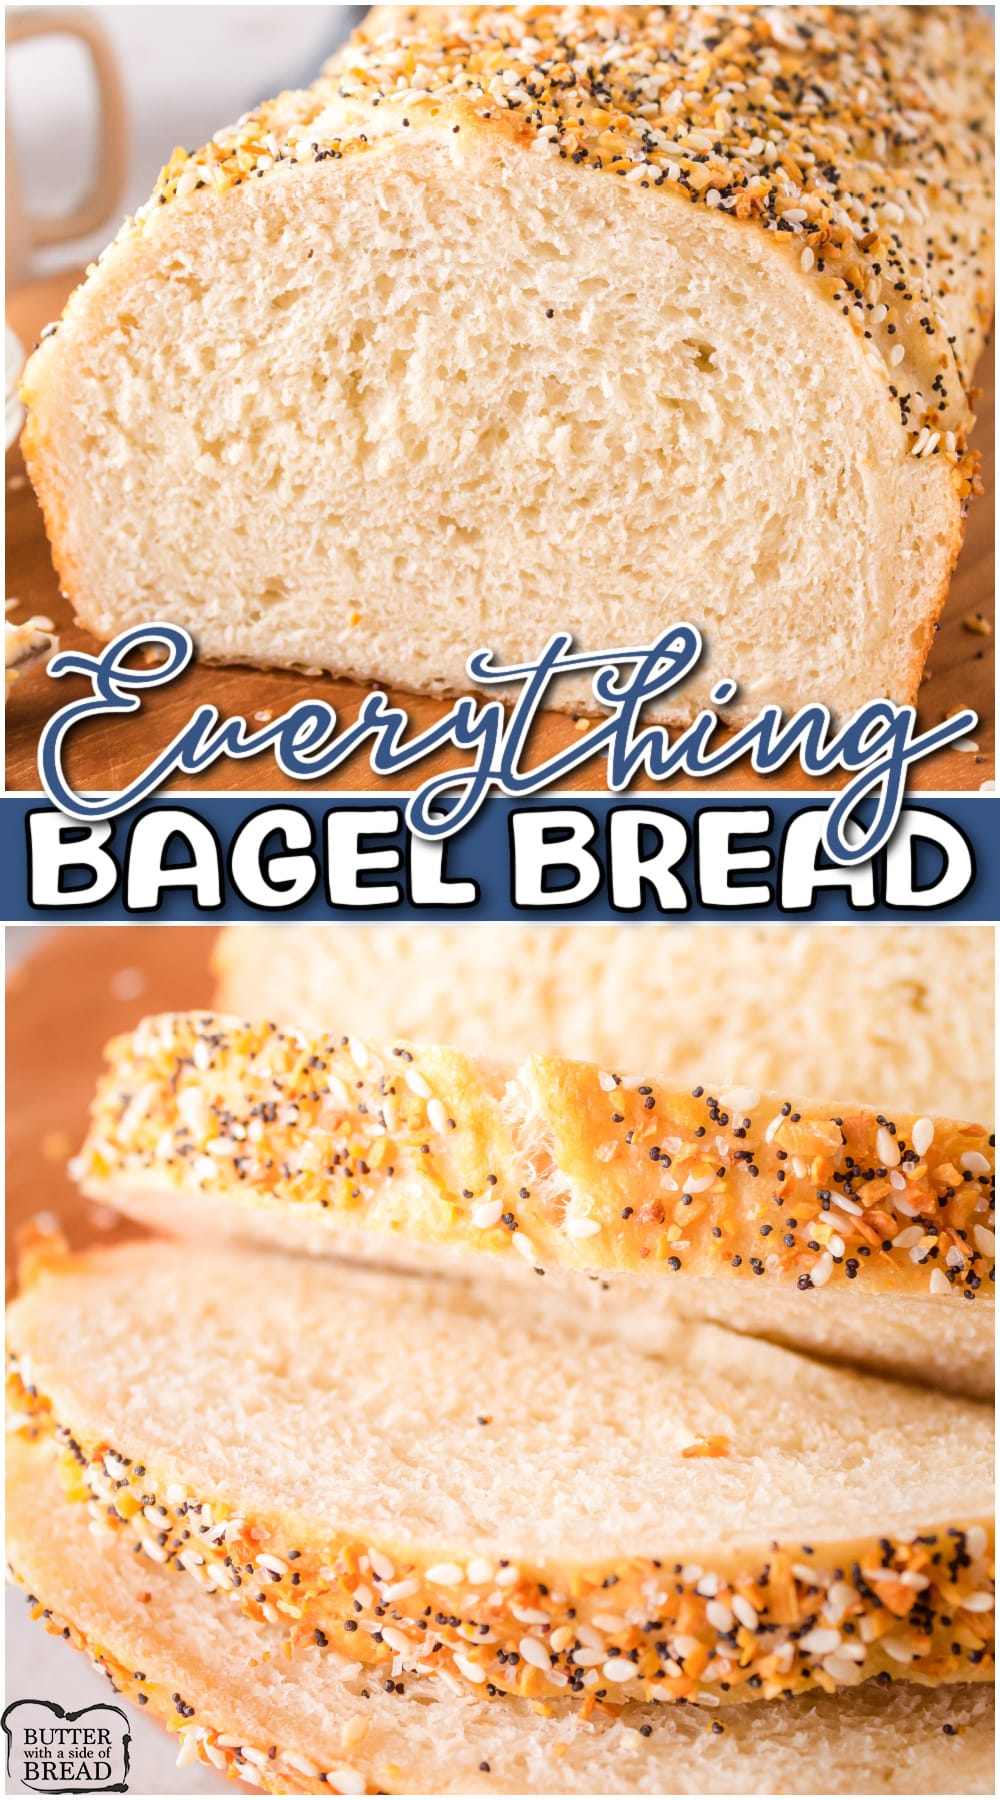 Bagel Bread combines everything you love about bagels into a delicious loaf of bread! This everything bagel bread recipe is perfect for breakfast, a light afternoon snack or even a delicious sandwich!